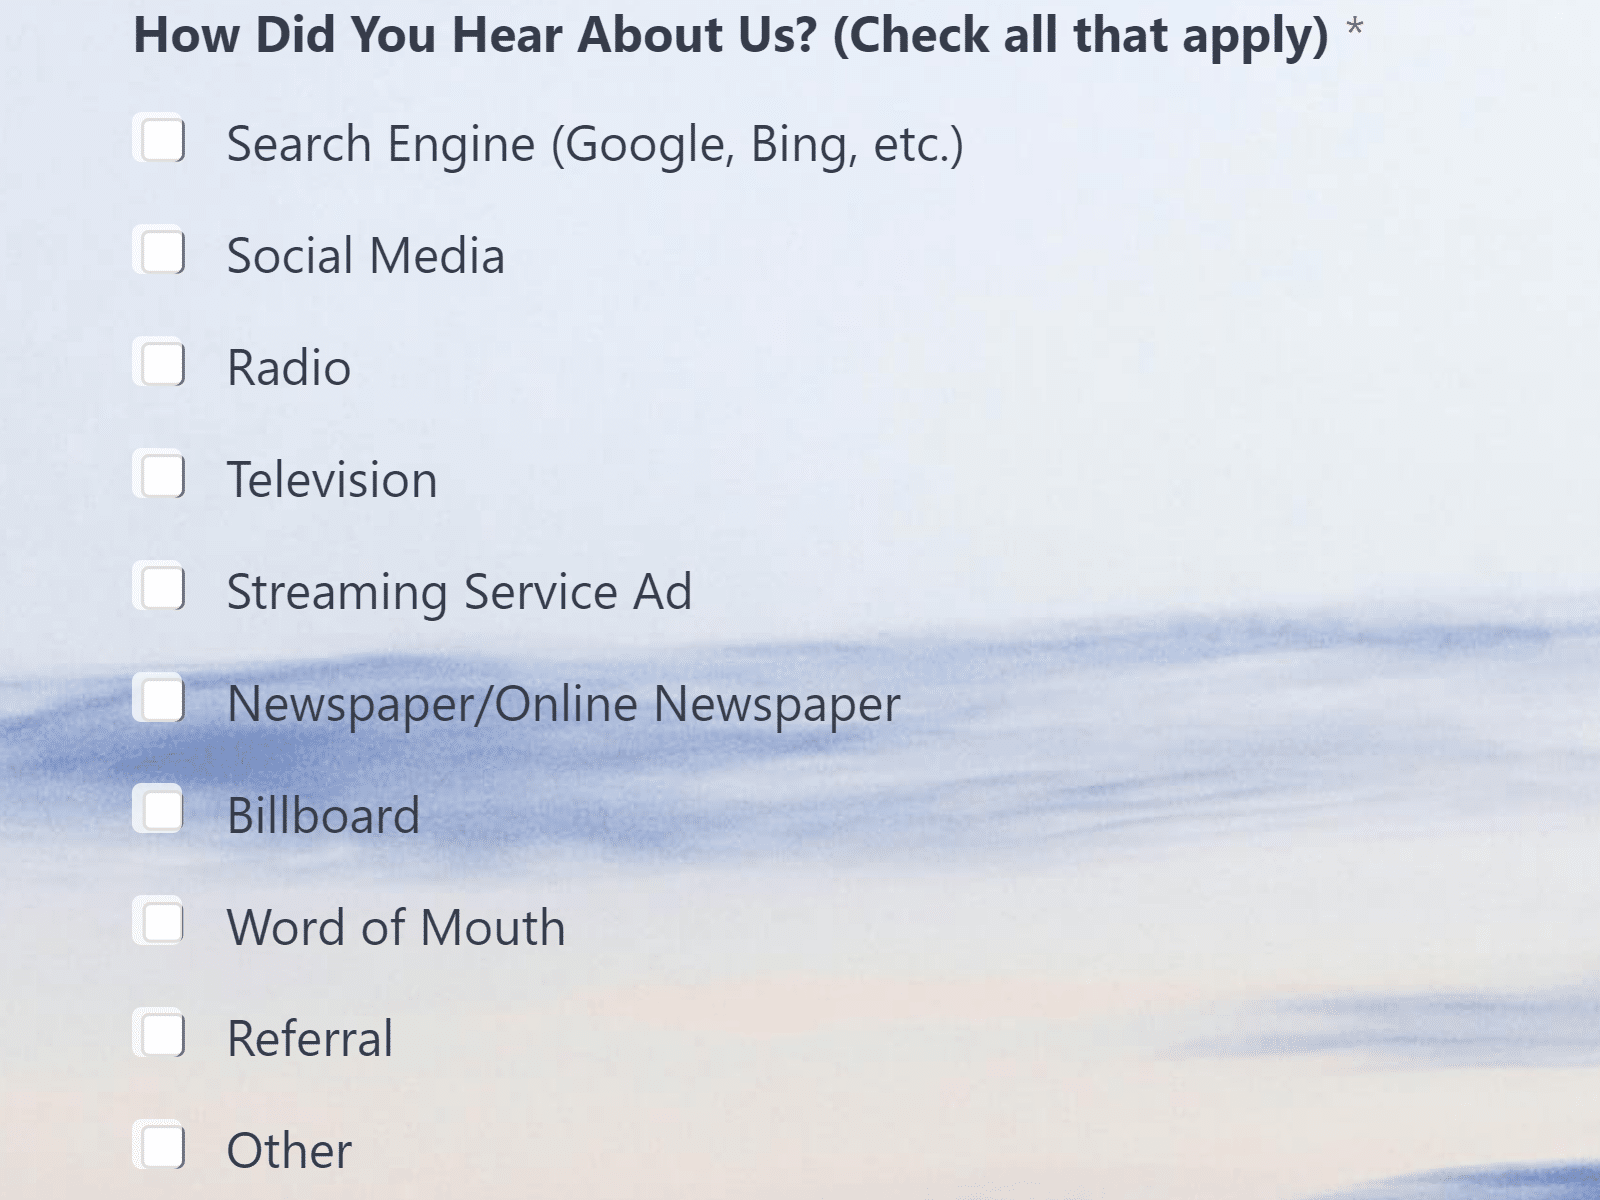 "how did you hear about us" - survey question